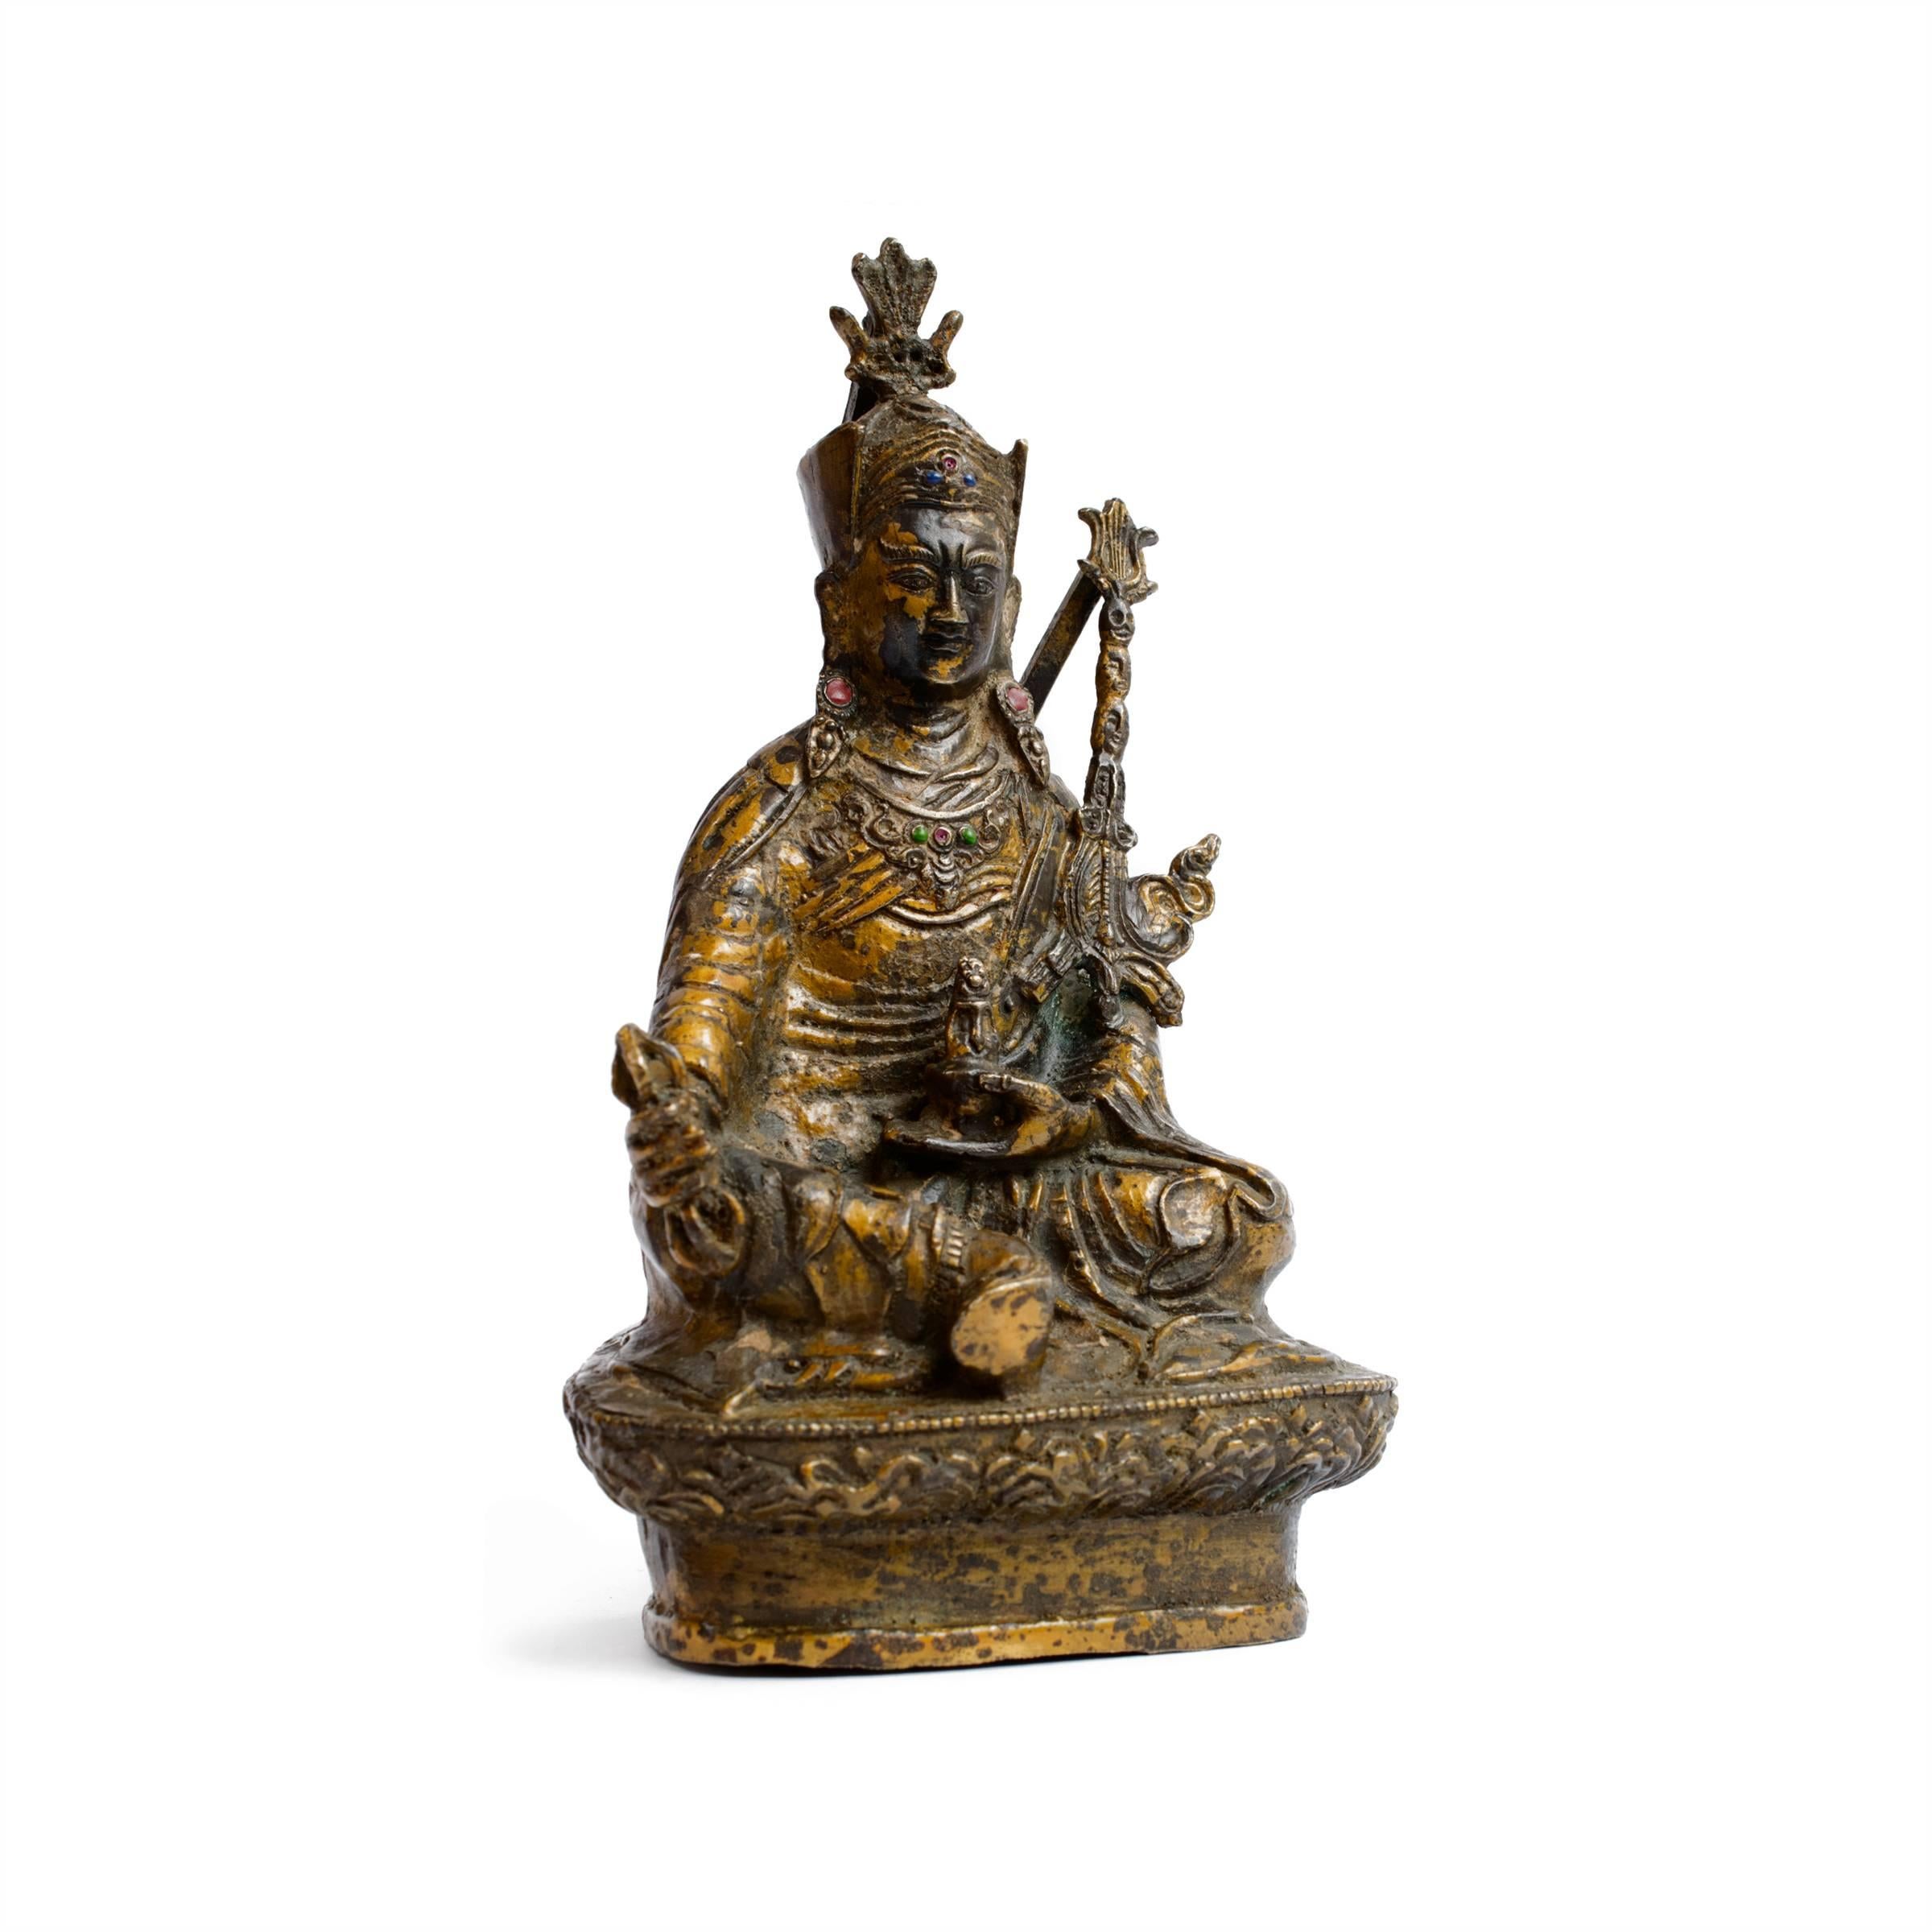 This Tibetan Buddhist deity is finely crafted out of gilded bronze and inlaid with stones. The figure holds a bottle in his left hand and in his right a varja—a powerful ritual object symbolizing indestructibility and irresistible force—he is seated